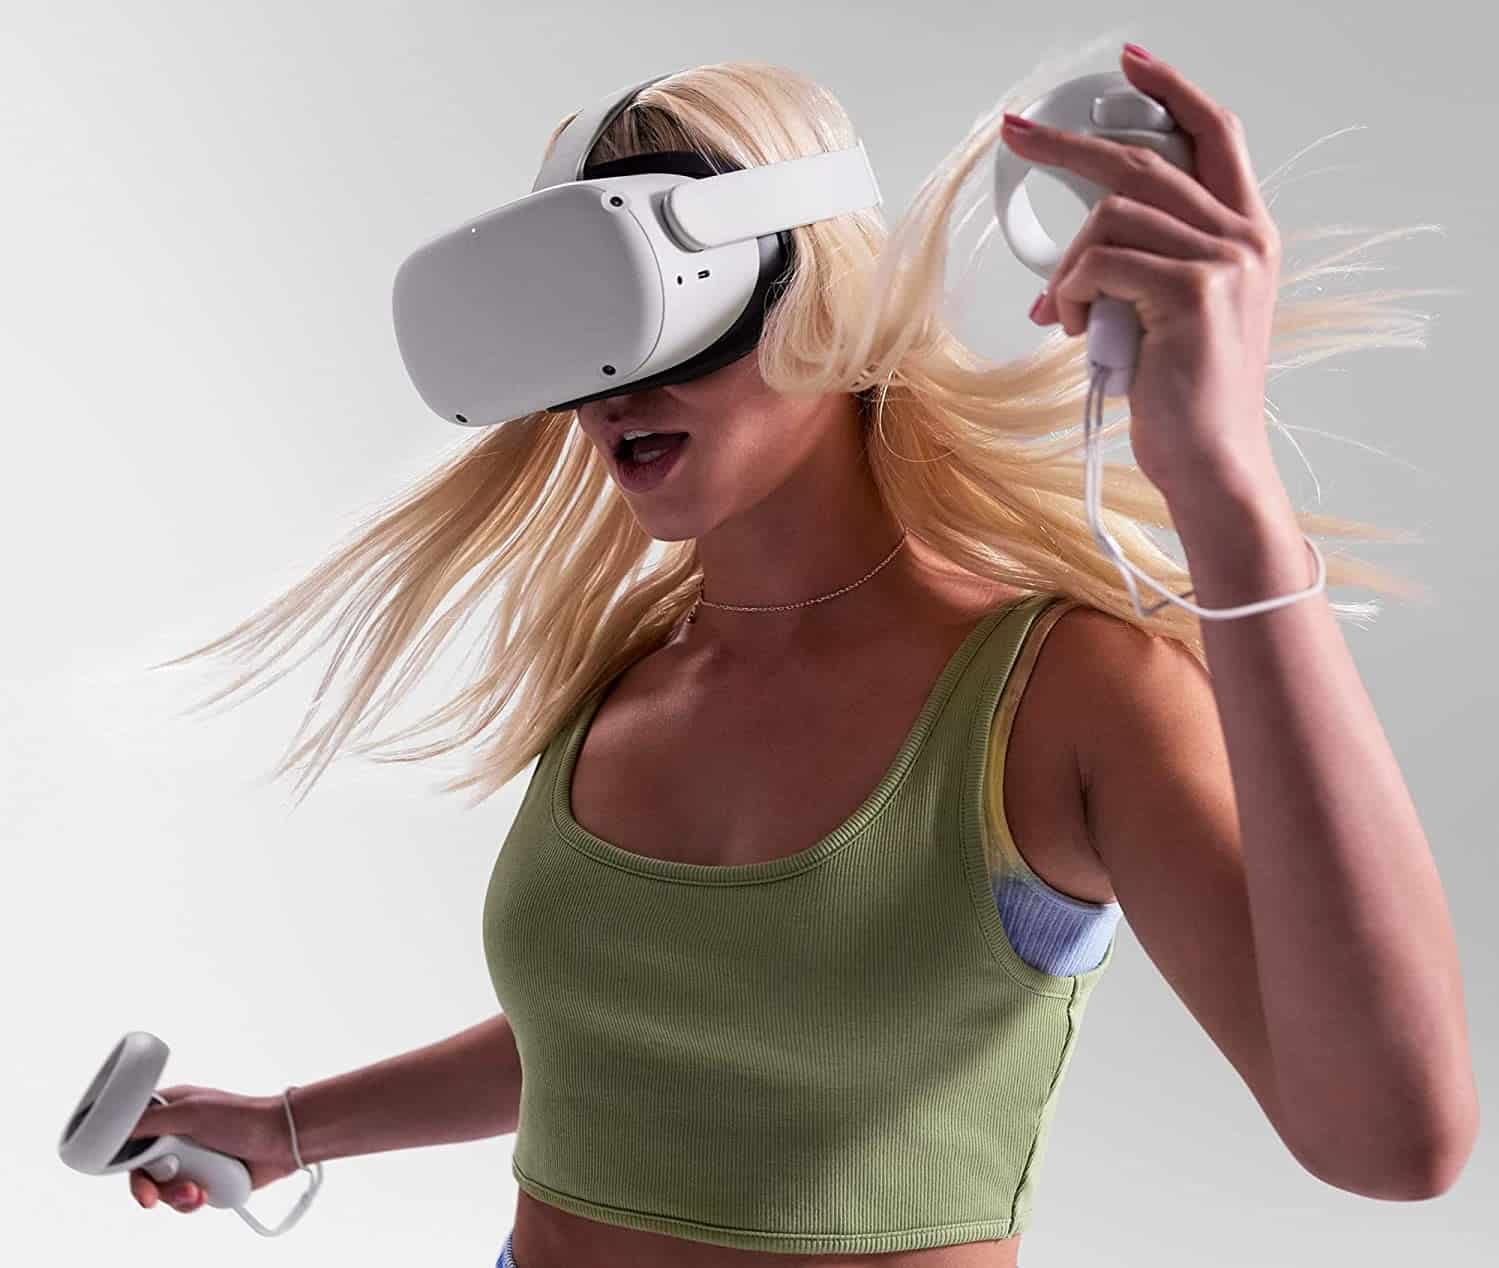 Meta Quest 2 VR Headset for girlfriend cleanup